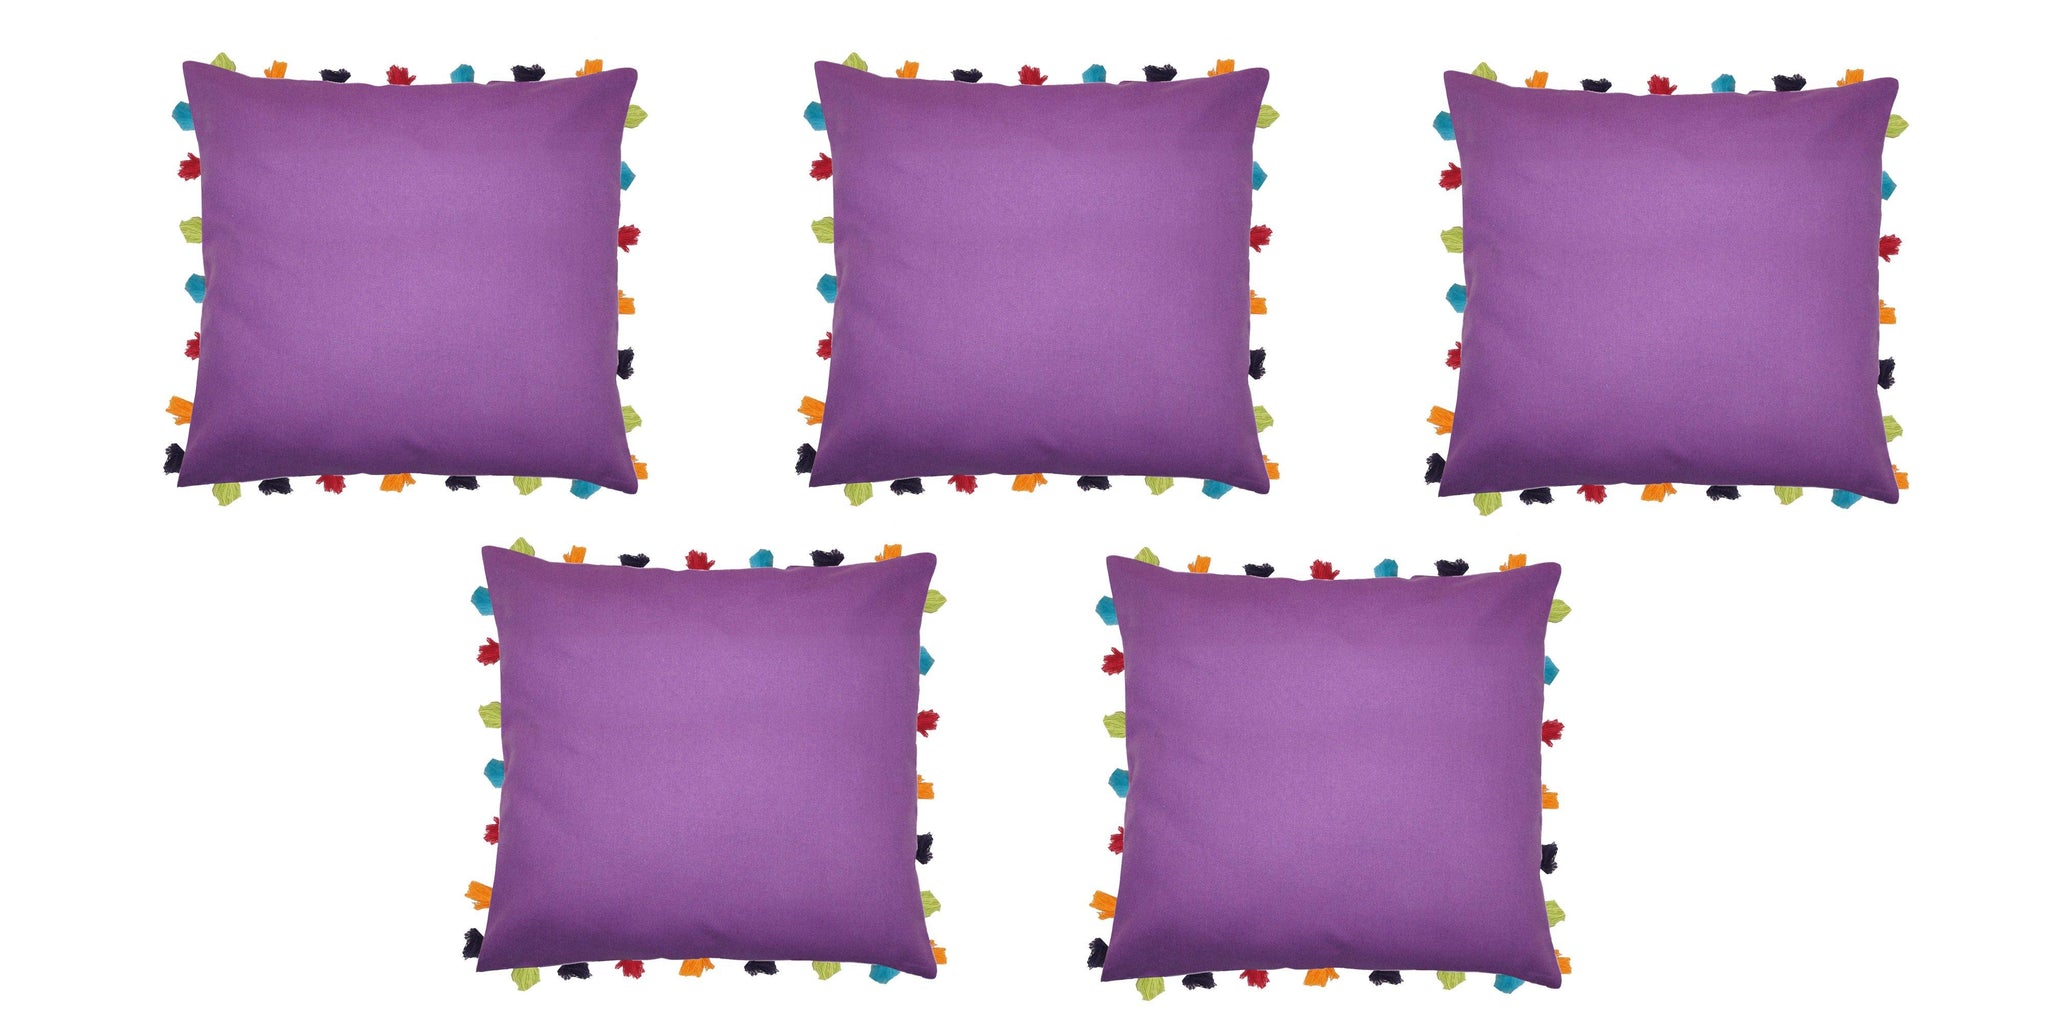 Lushomes Royal Lilac Cushion Cover with Colorful tassels (5 pcs, 20 x 20”) - Lushomes